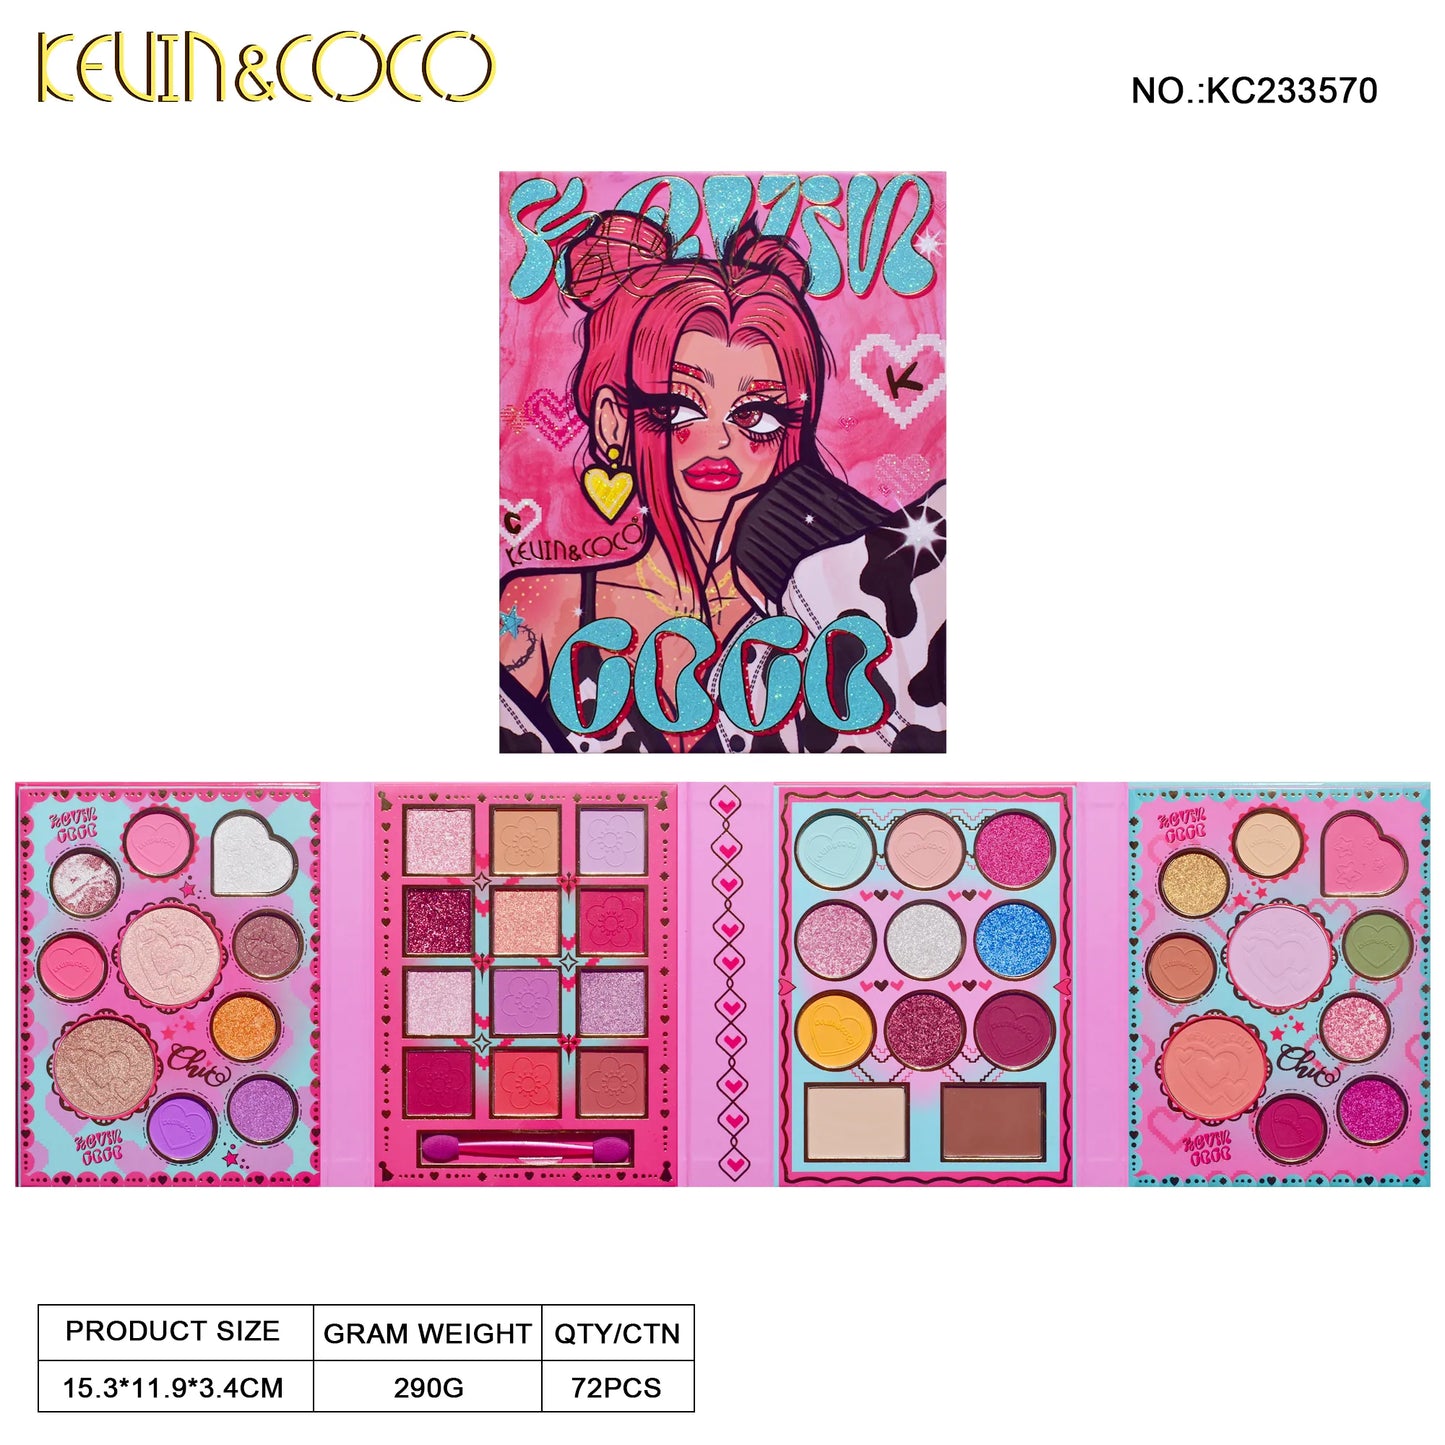 KEVIN AND COCO BRATTY 3 PALETTE KC233570  R16